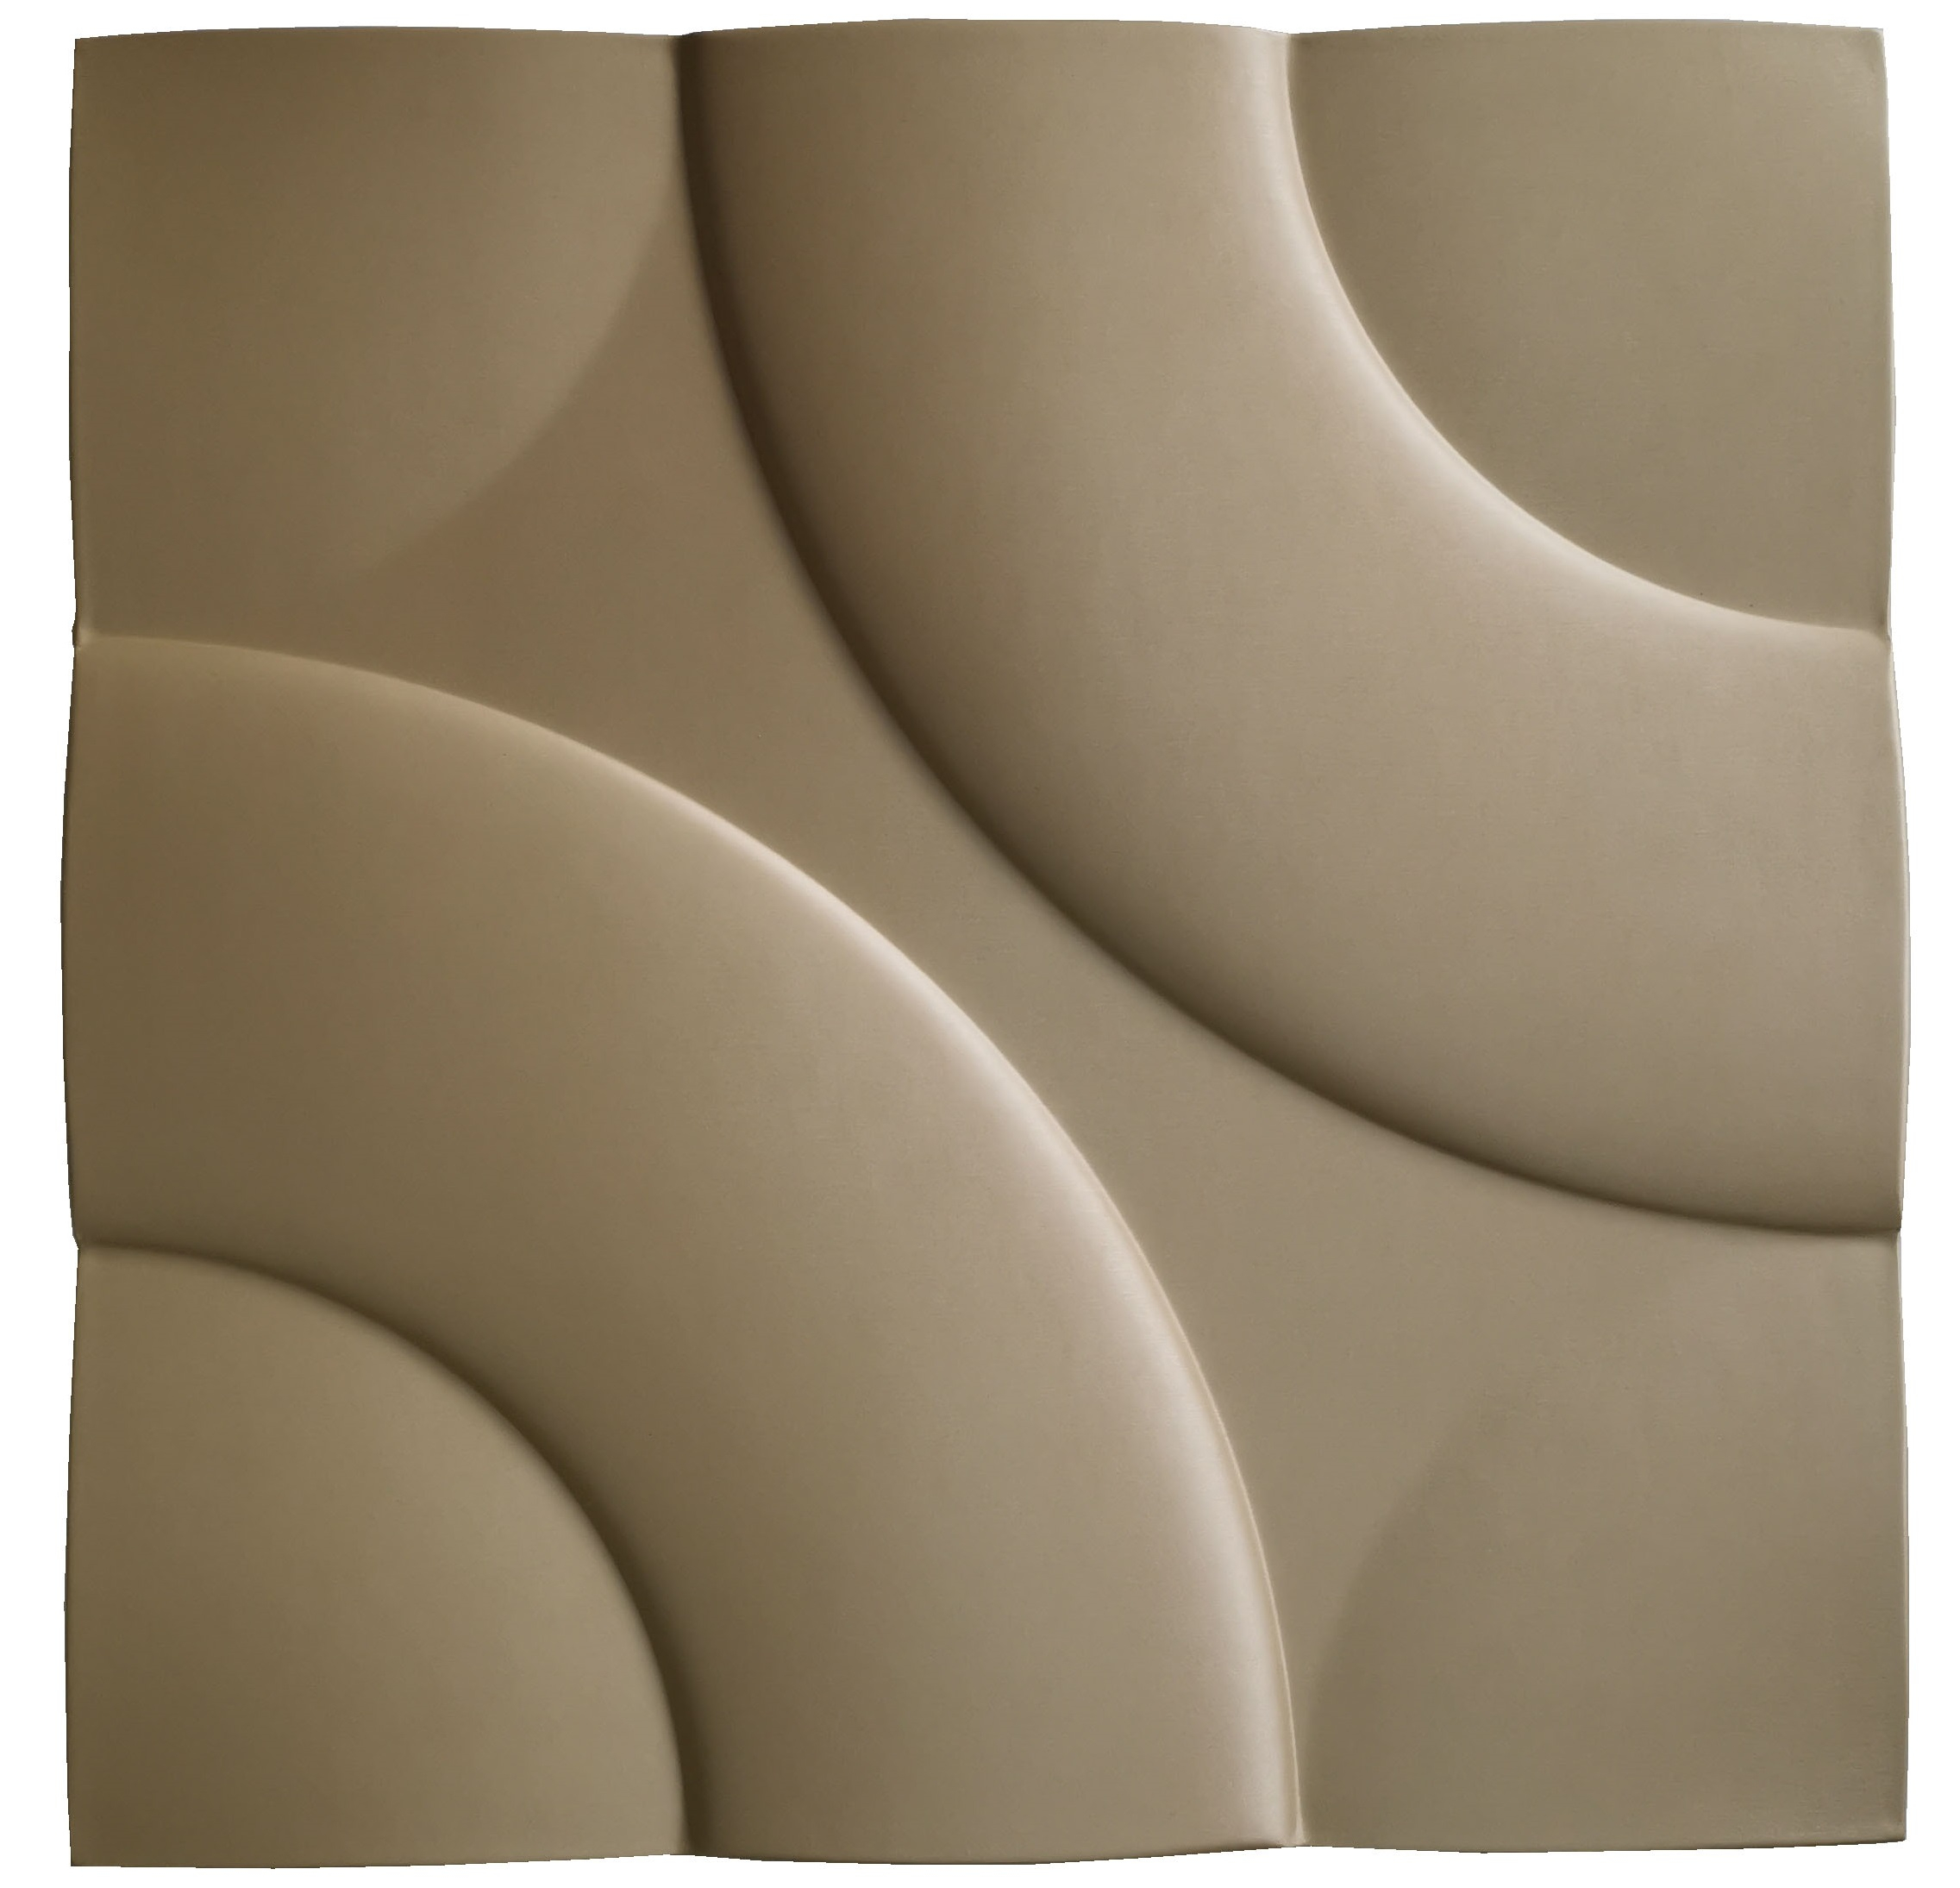 Semi Pu Leather White Indoor Wall Panel